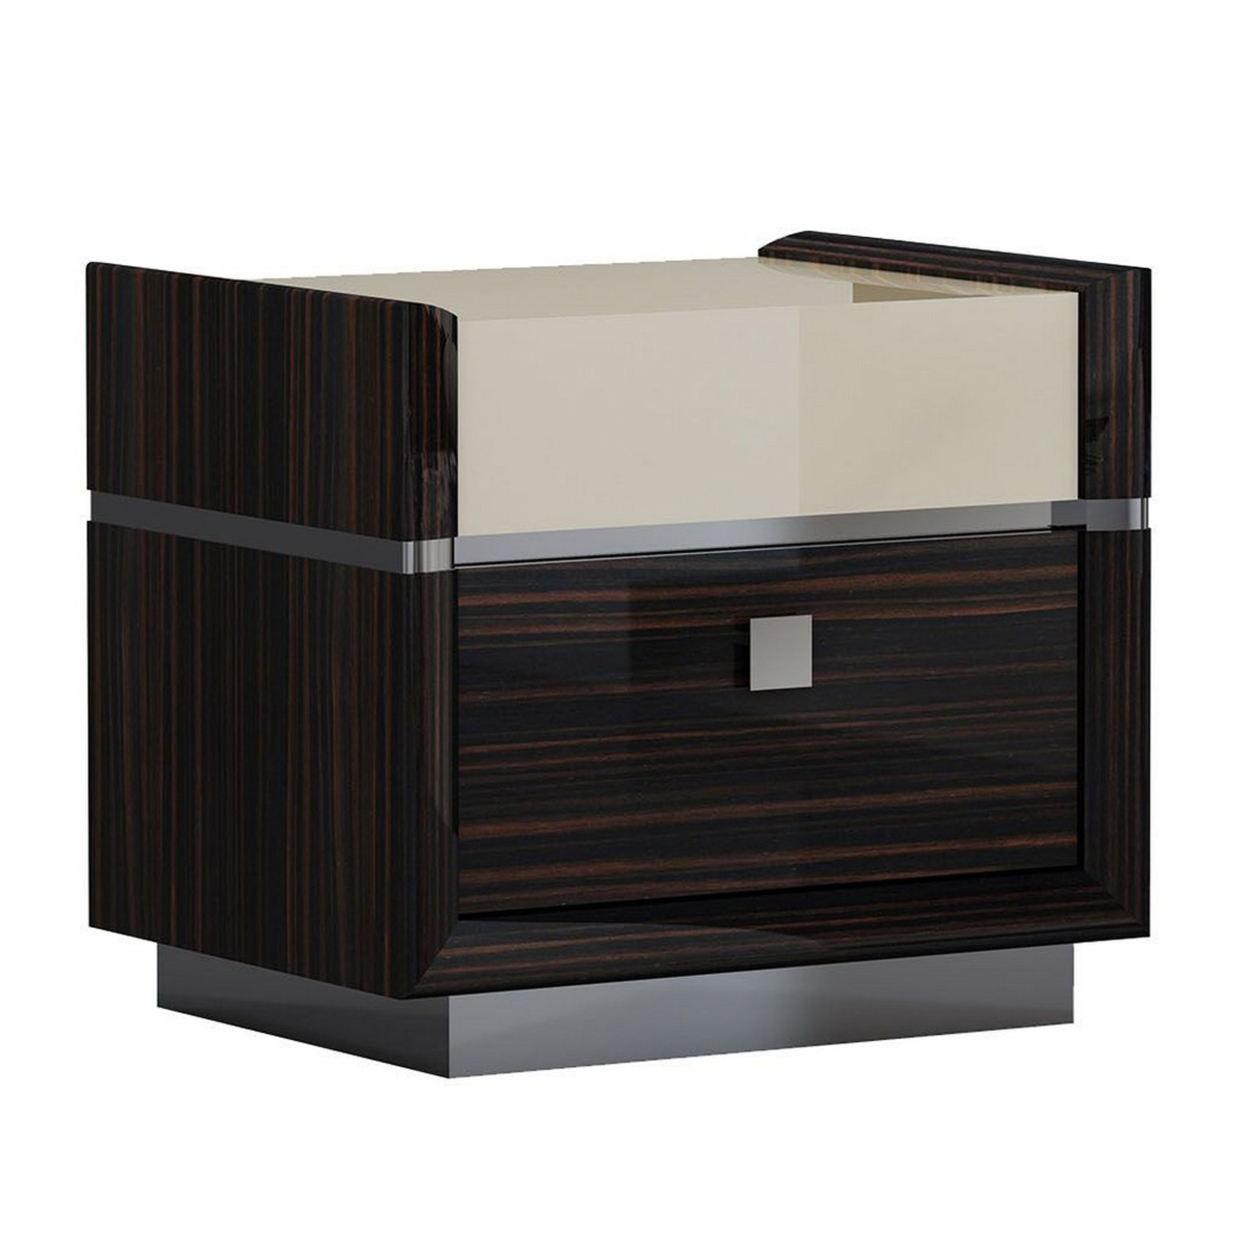 2 Drawer Nightstand With Grain Details And Plinth Base, Beige And Brown- Saltoro Sherpi